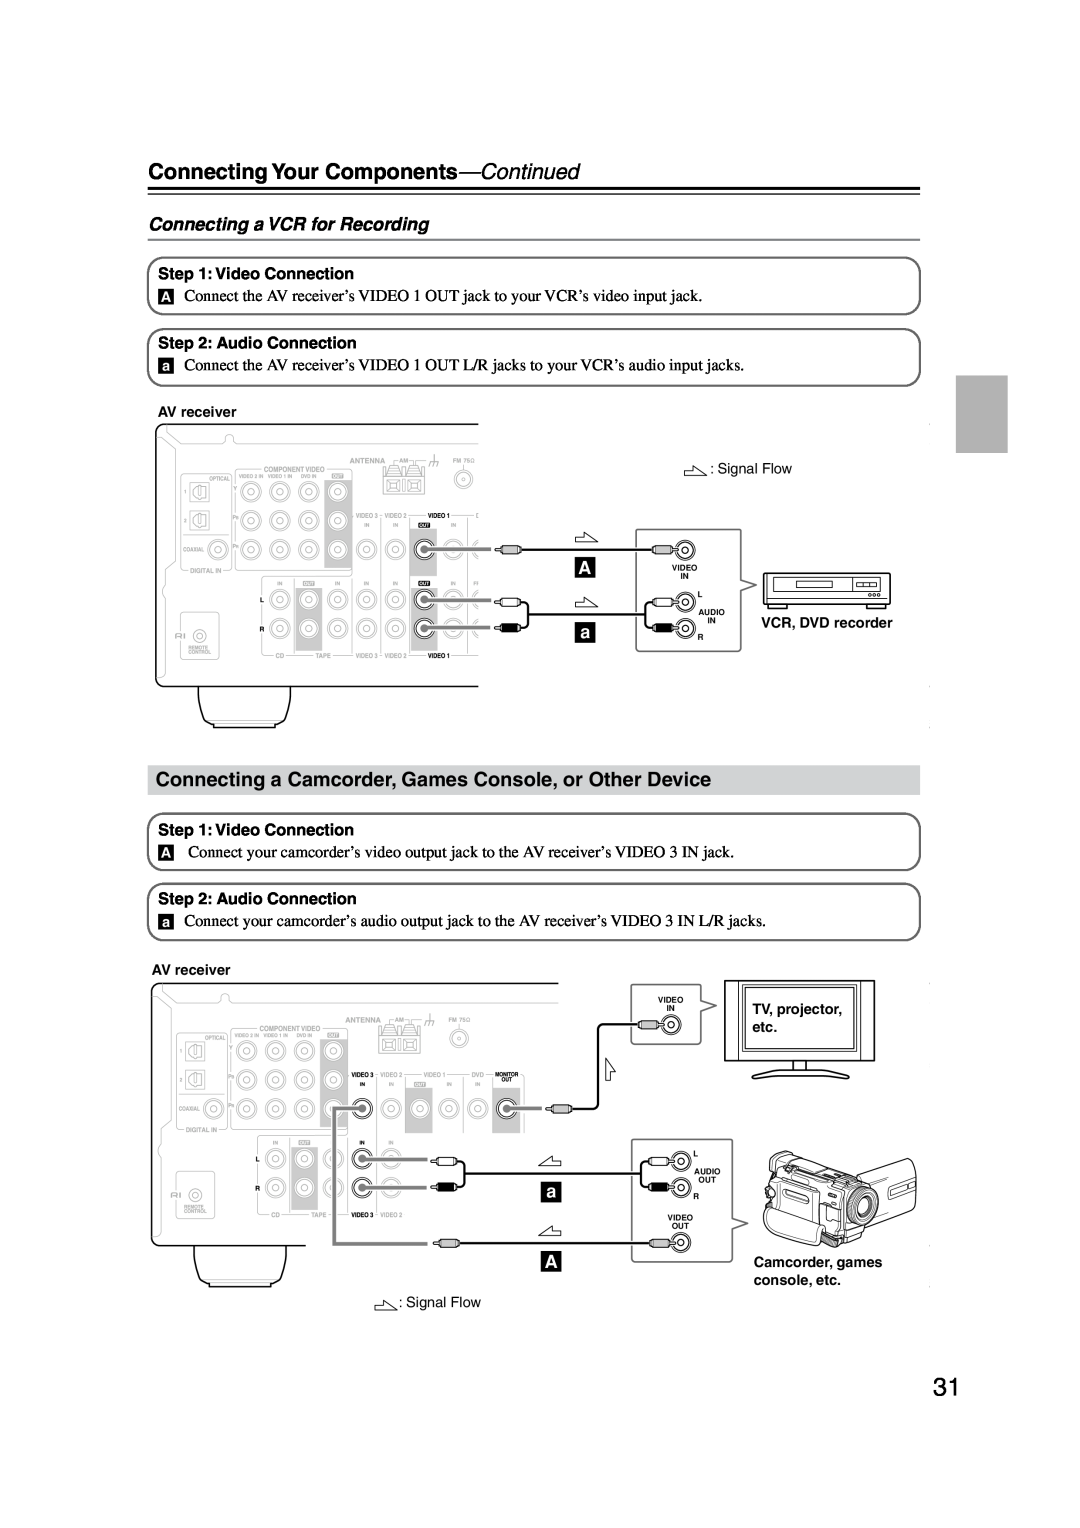 Onkyo HT-S4100 instruction manual Connecting Your Components-Continued, Connecting a VCR for Recording 